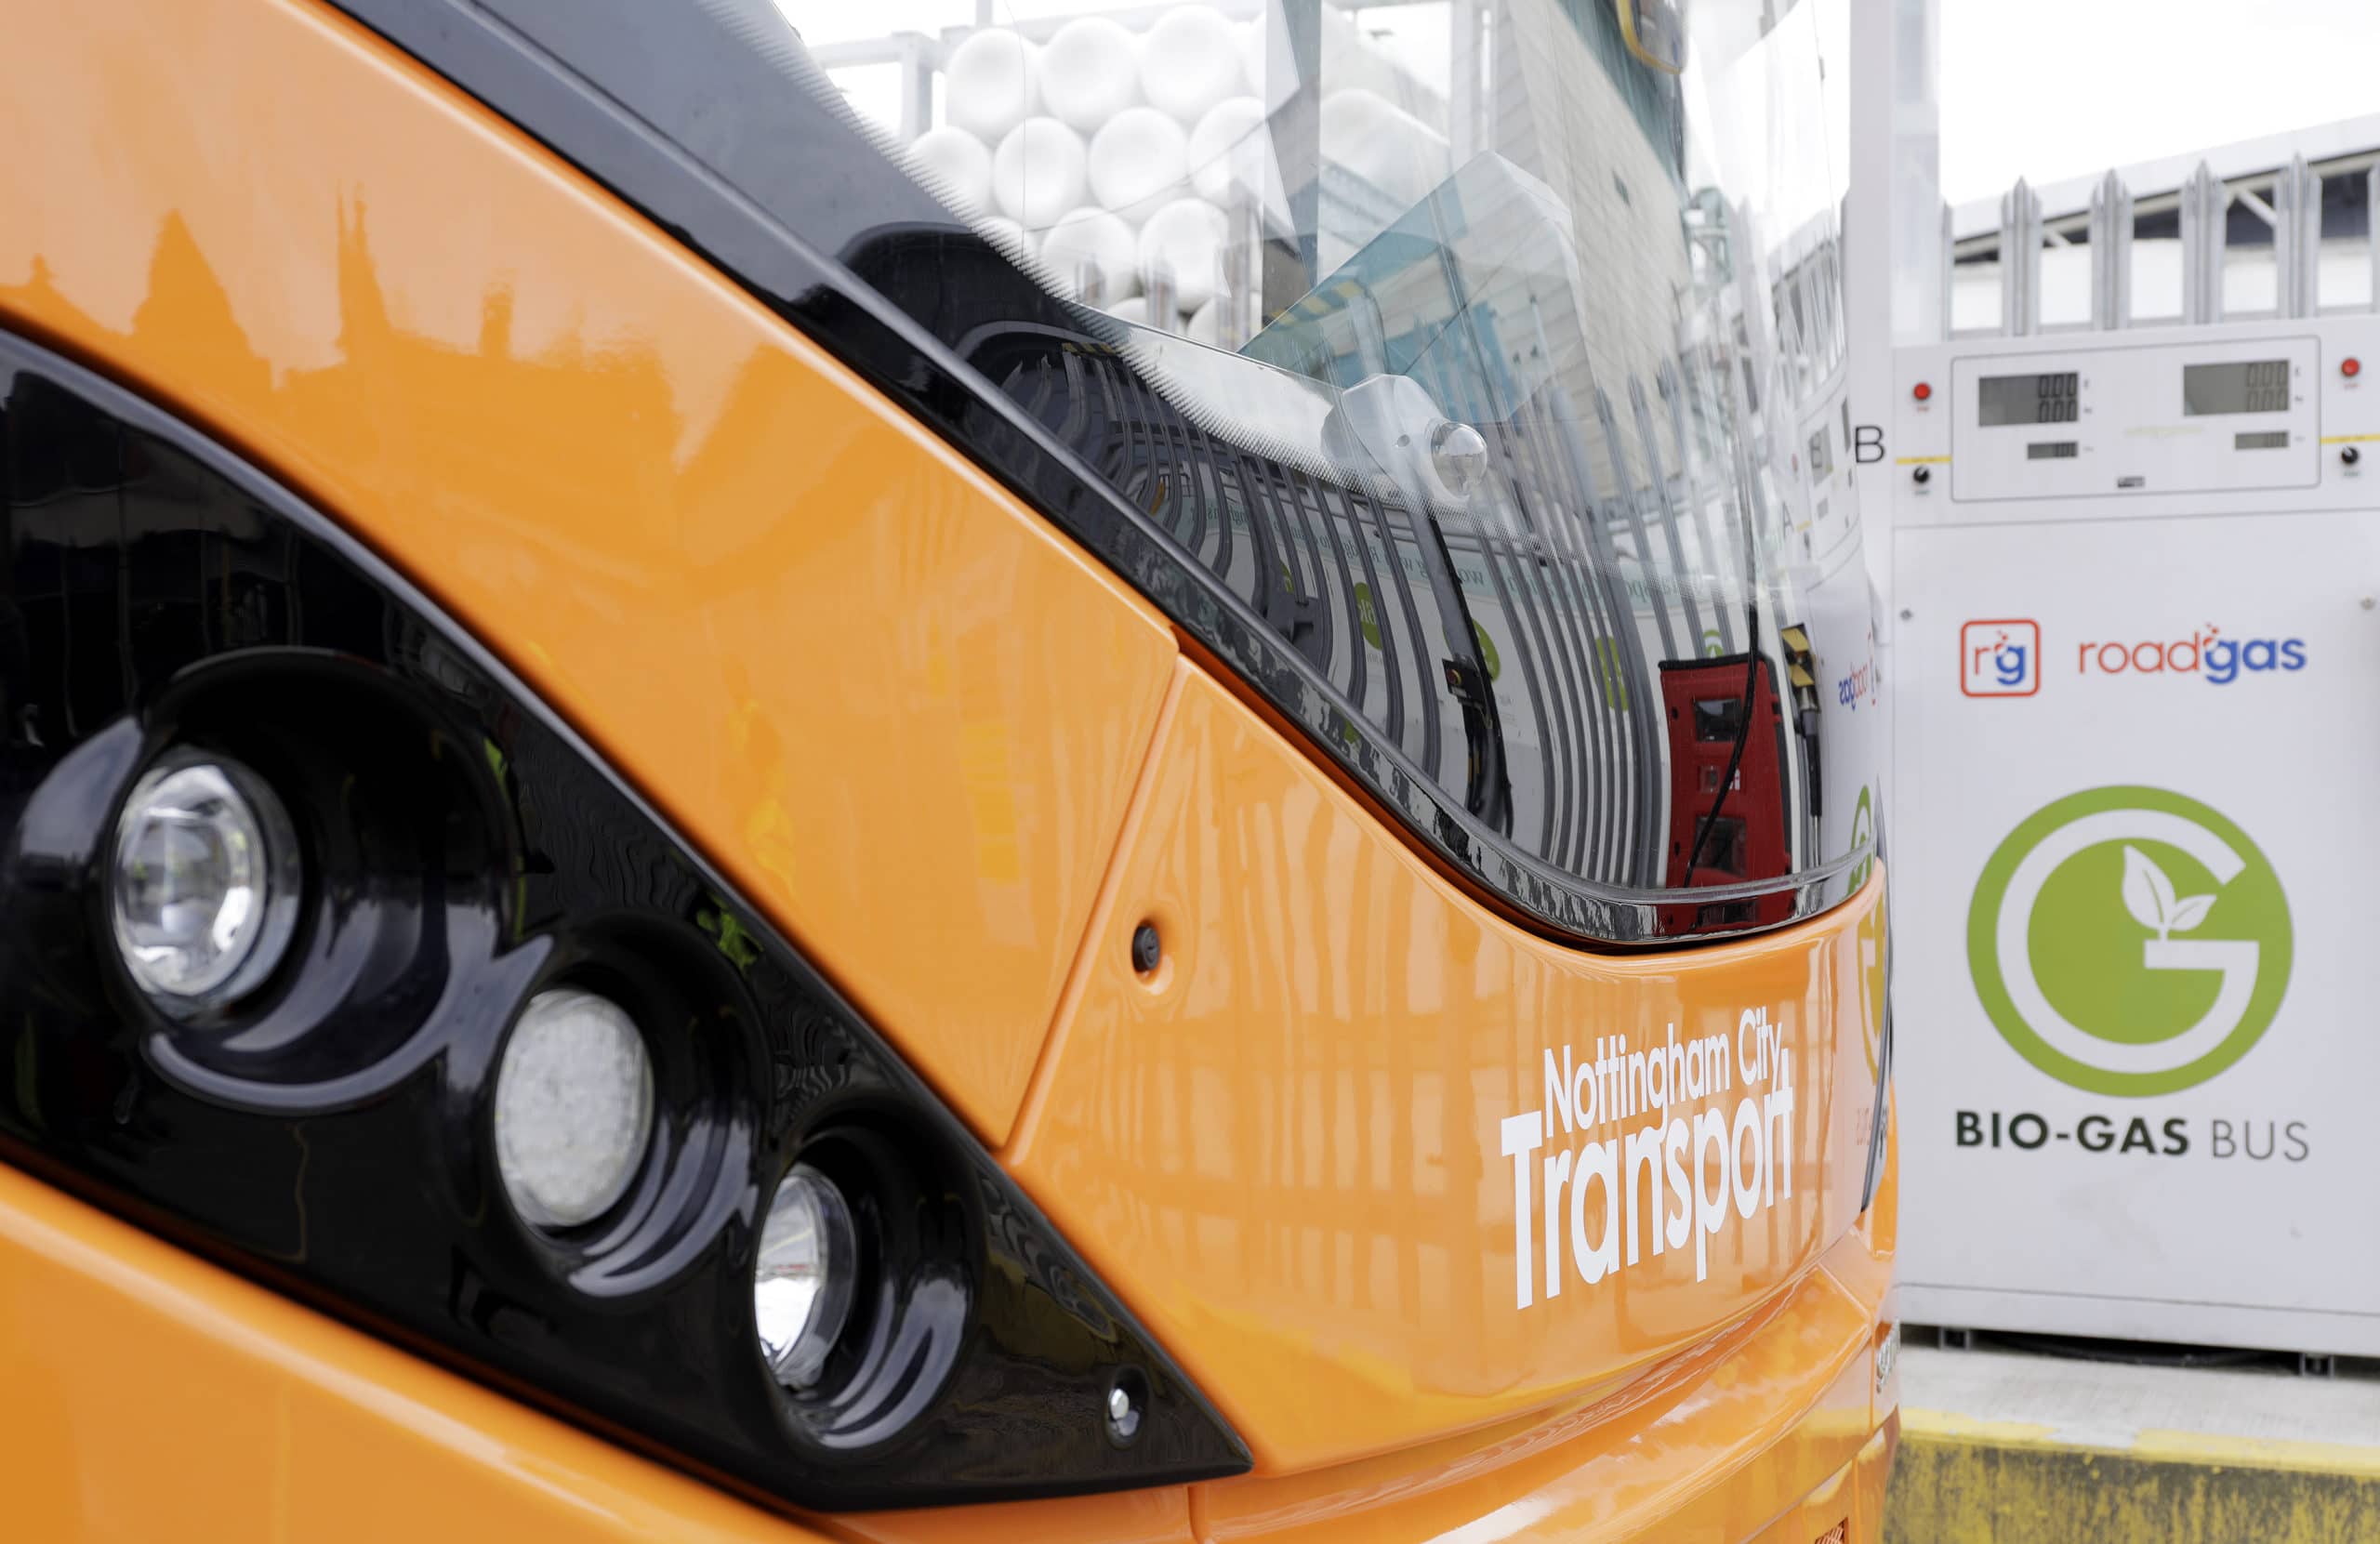 Final batch of Nottingham City Transport's Bio-Gas buses are launched on their orange line service.